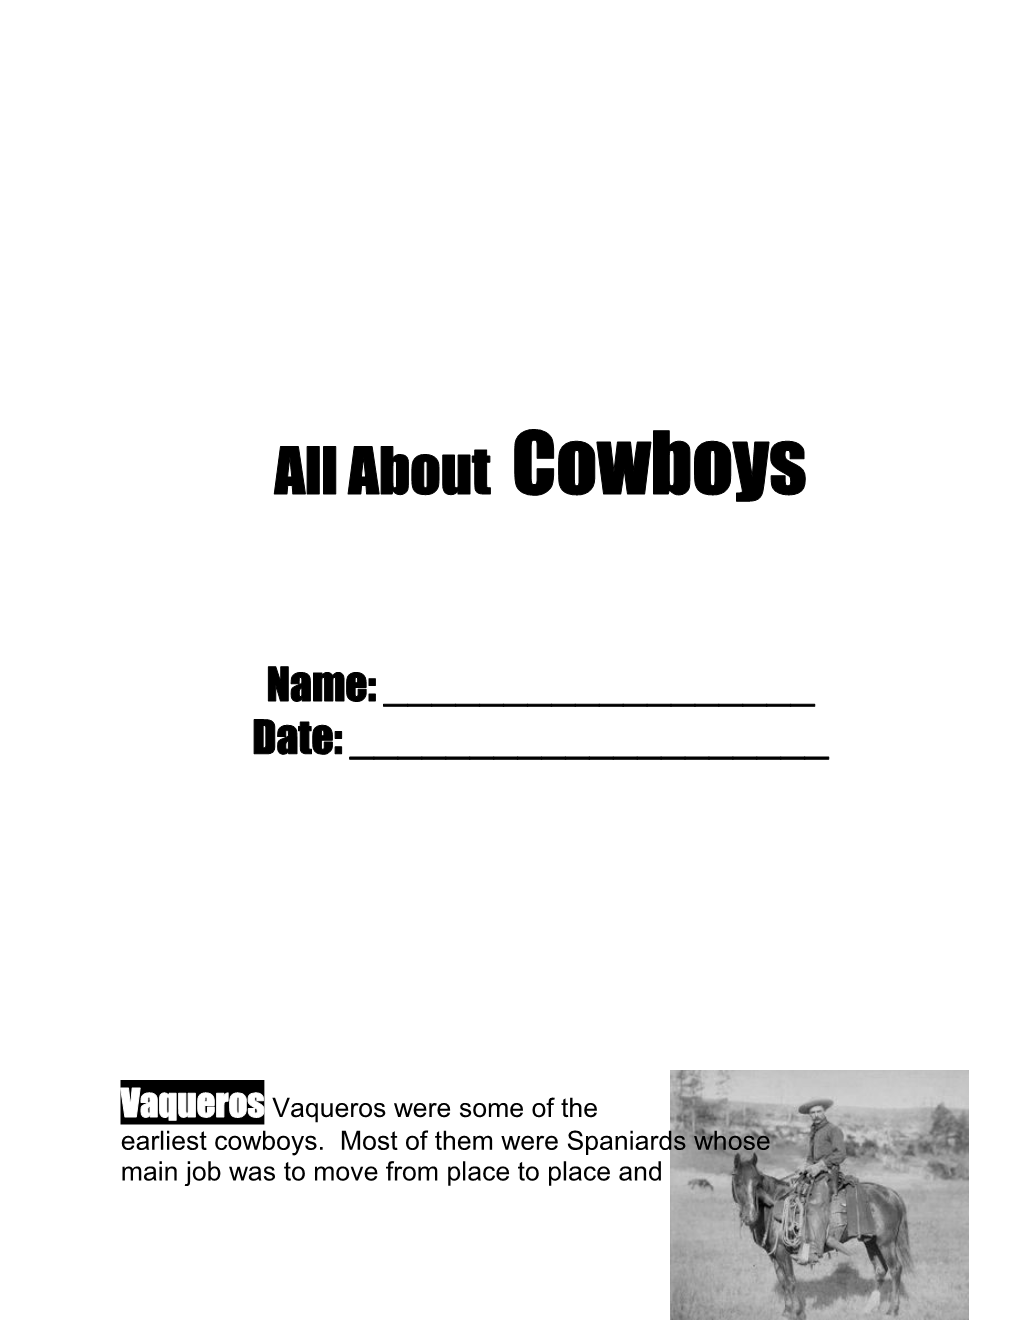 All About Cowboys